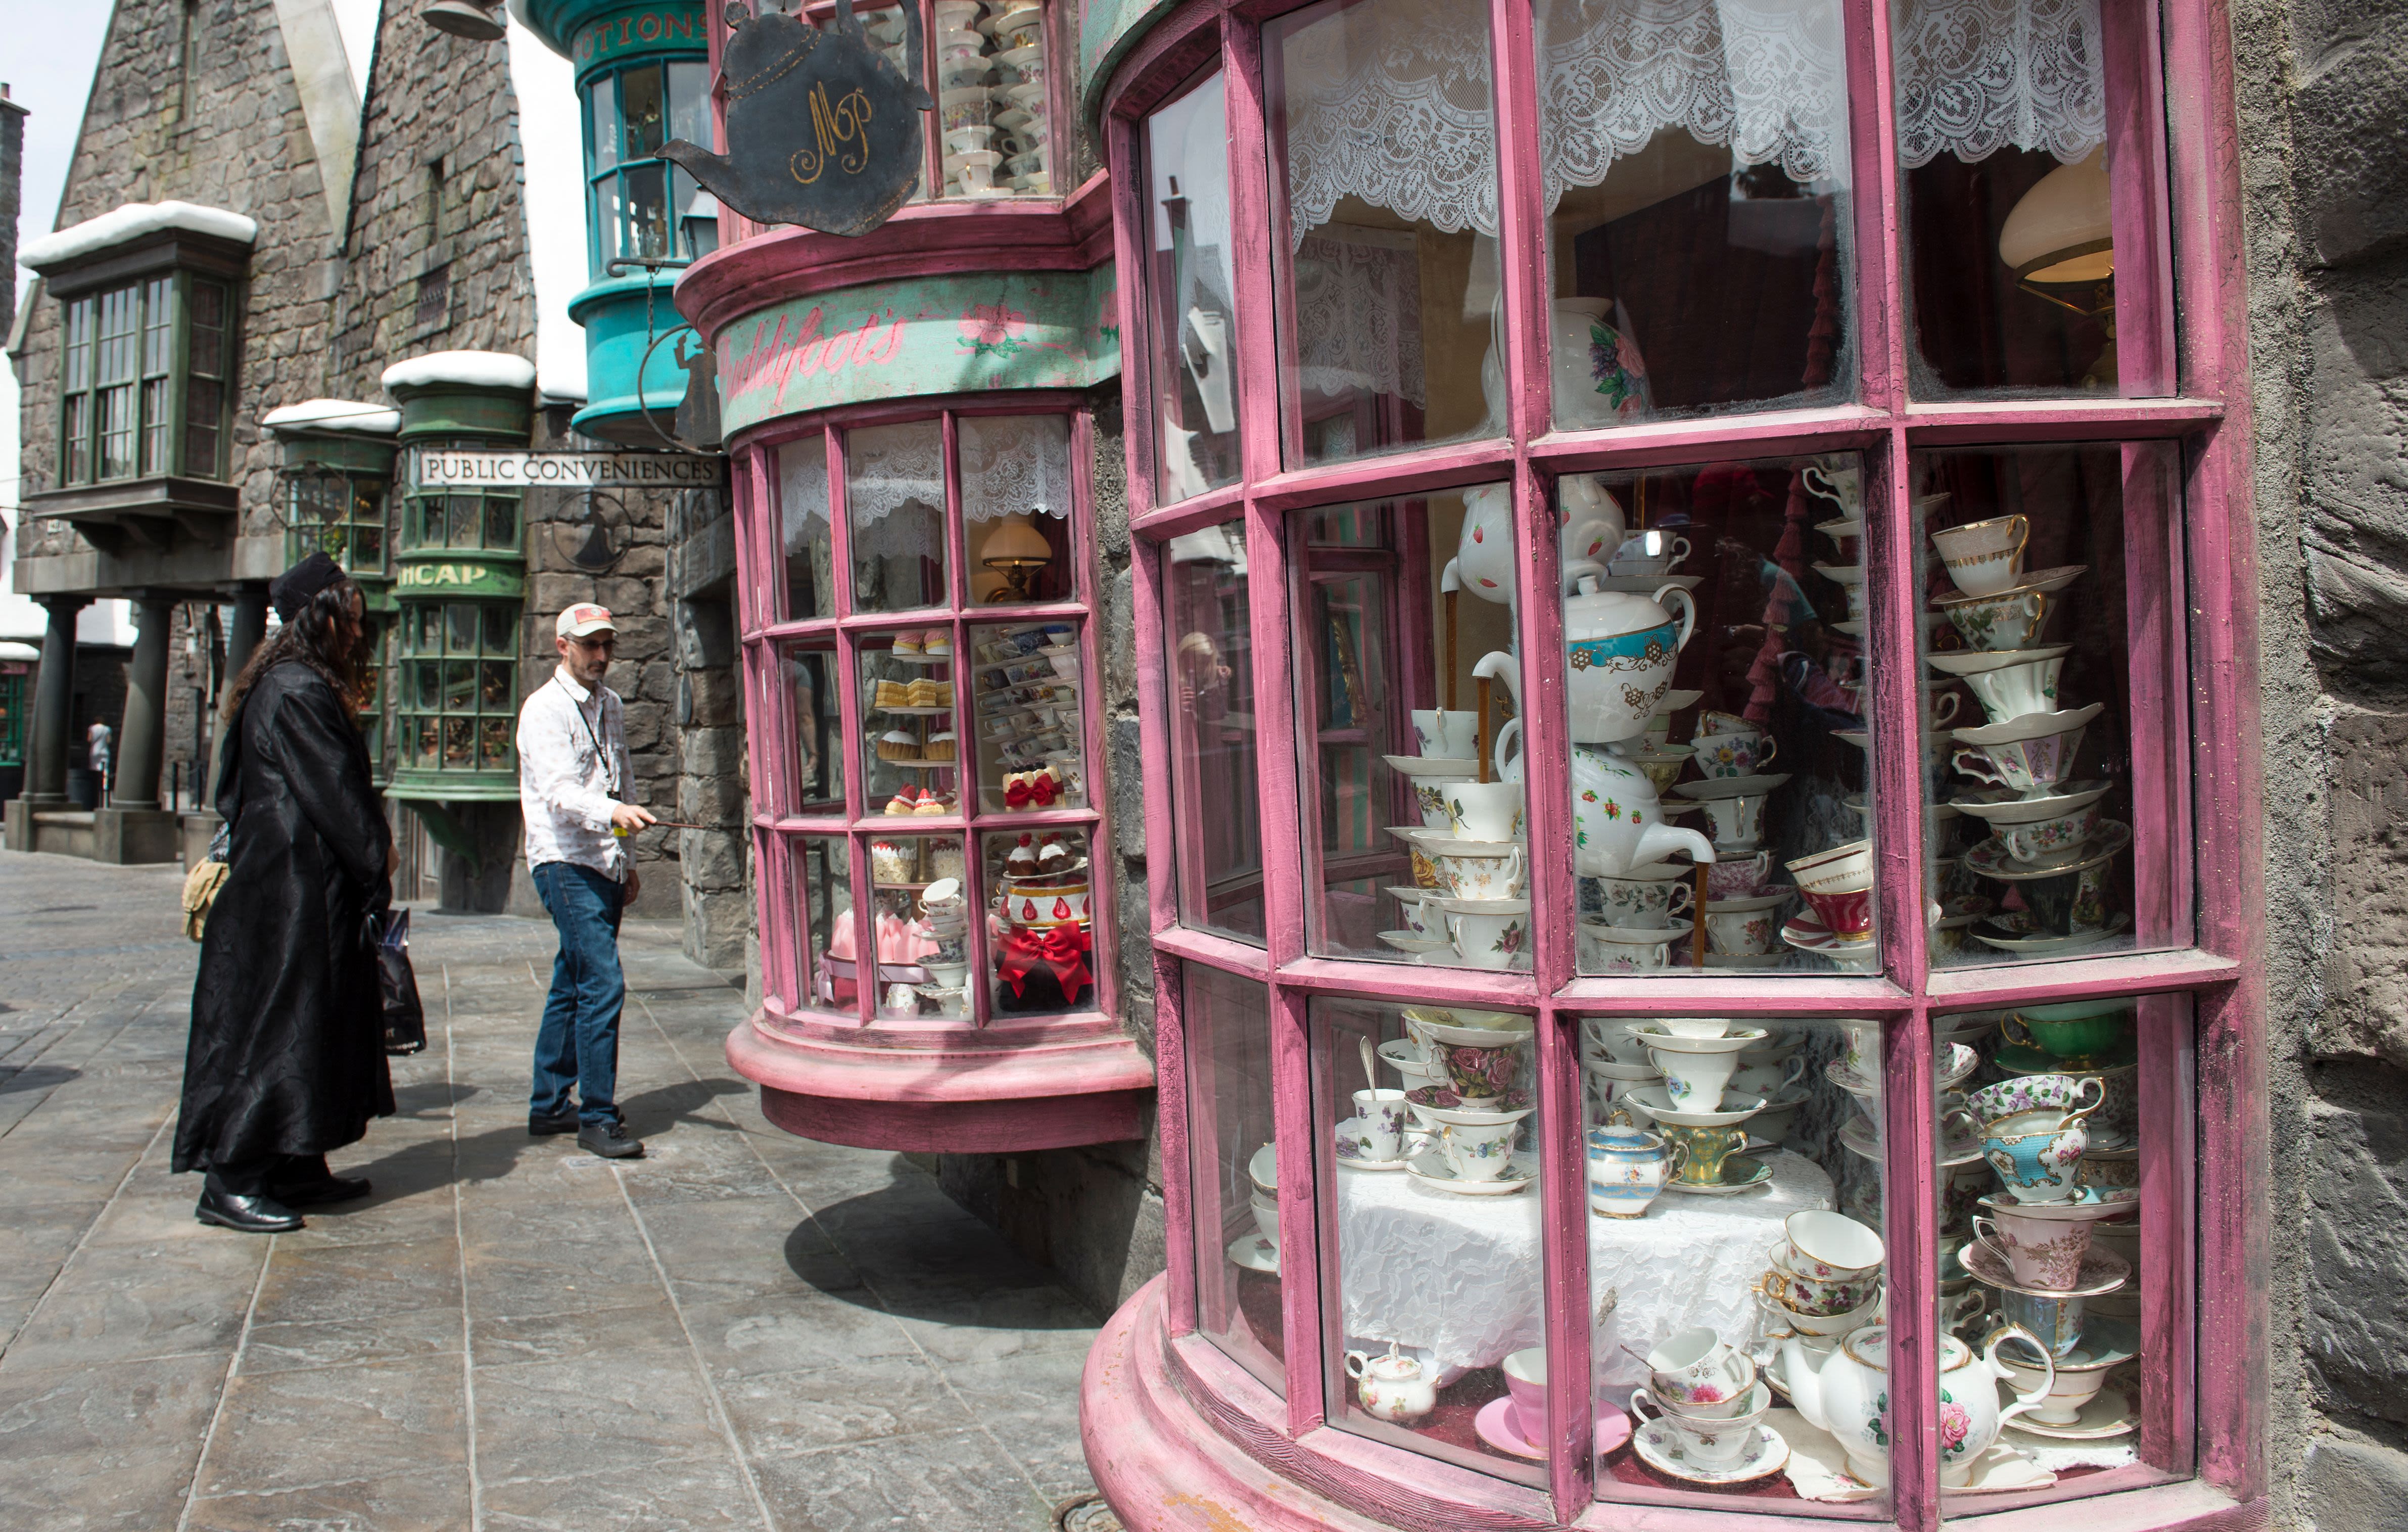 Wizarding World of Harry Potter: What's different in Hollywood?